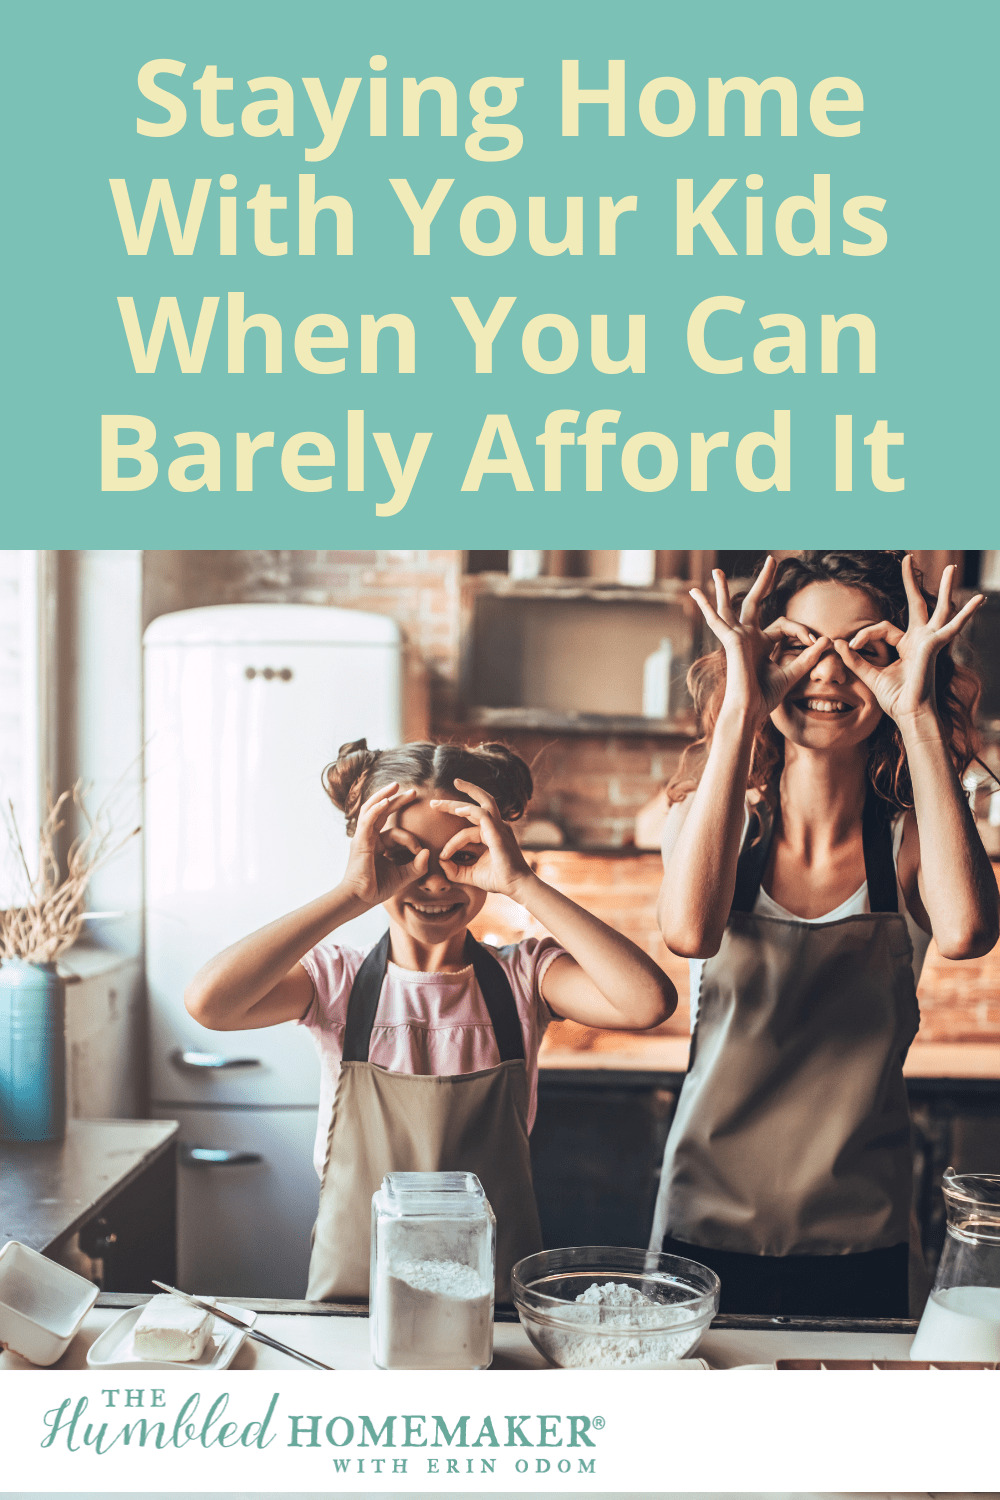 Don't think you can afford to stay at home with your kids? Check out this post on staying at home with your kids when you can barely afford it!